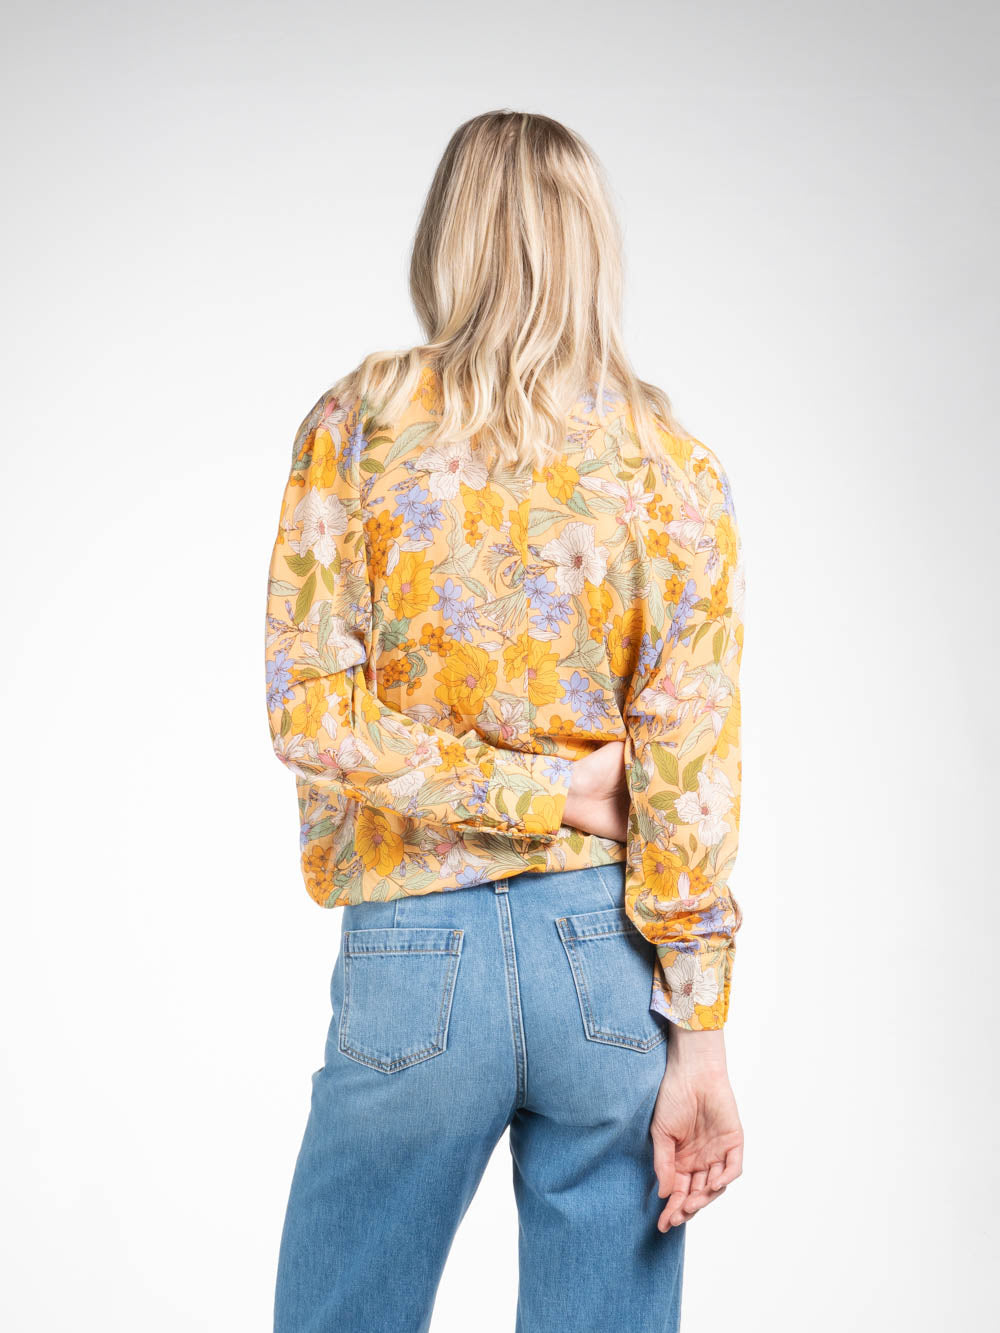 Floral Tops for Tall Ladies